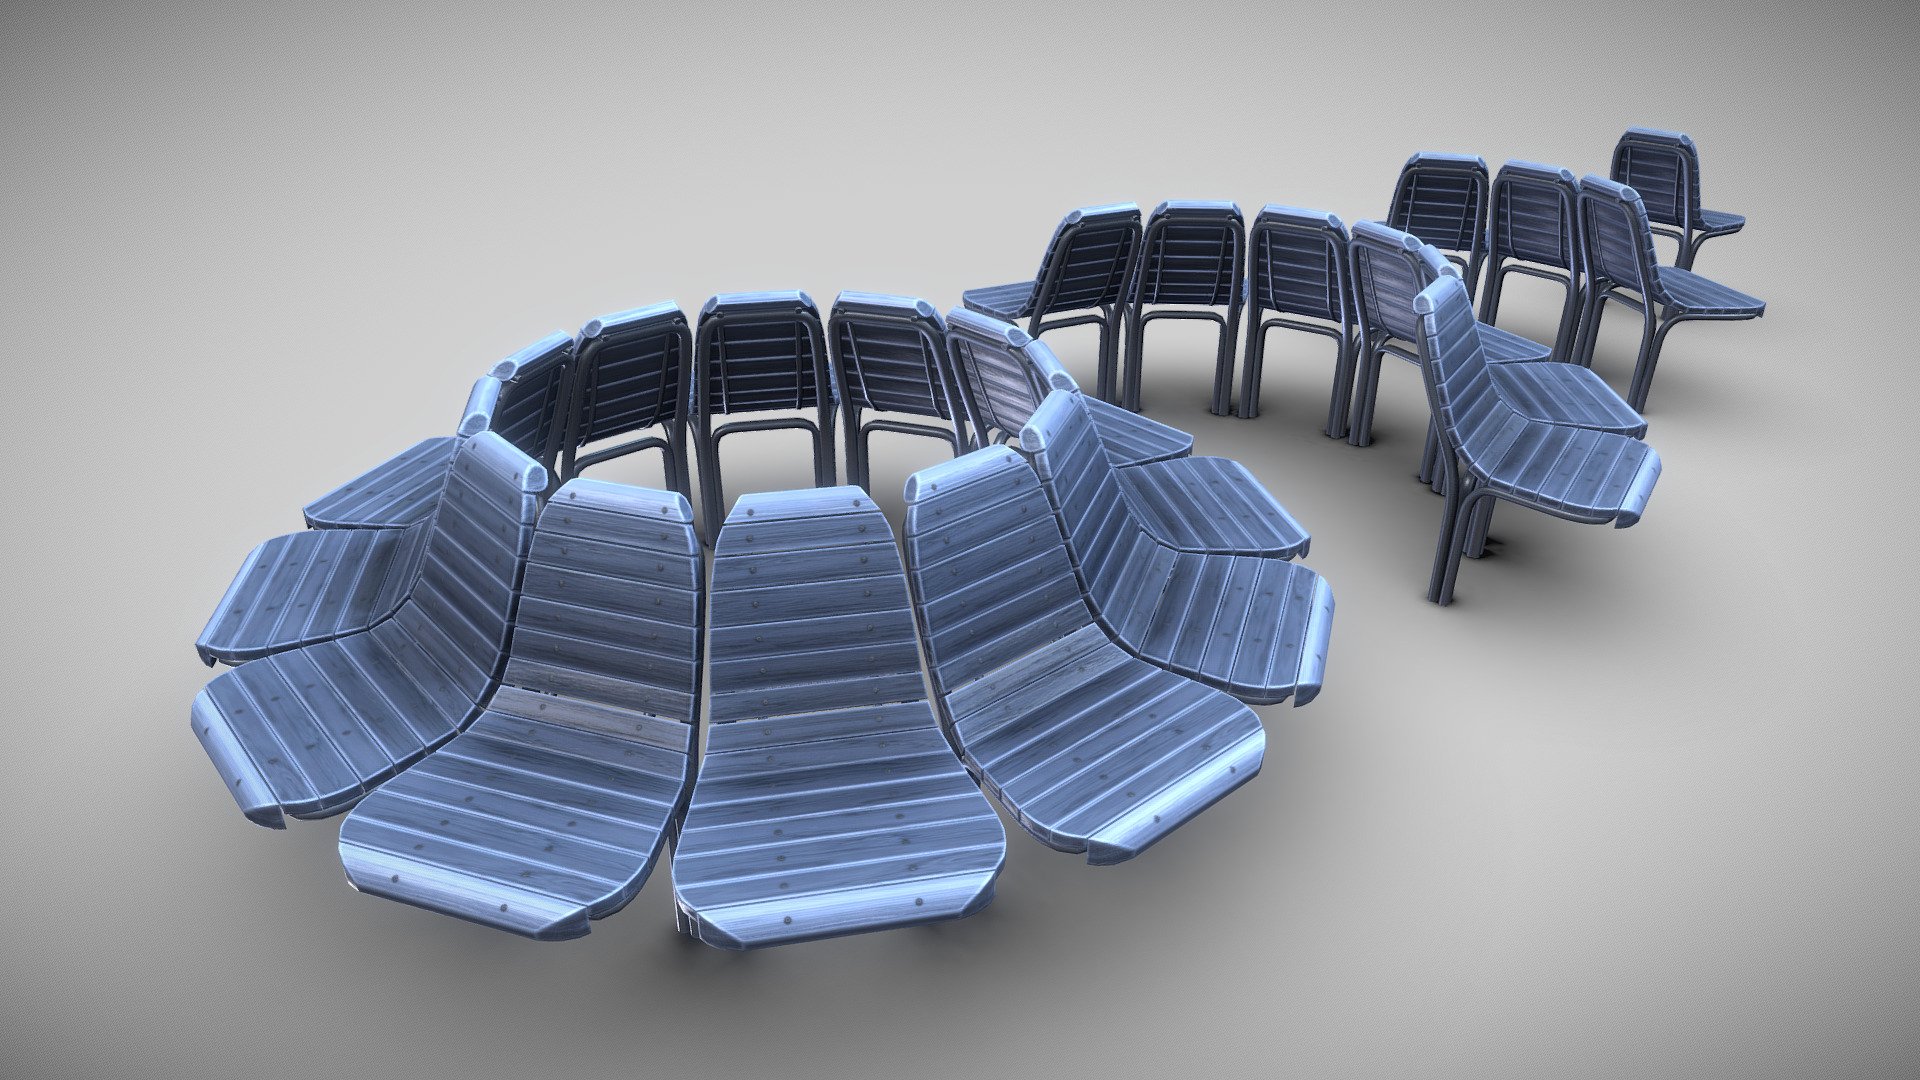 Round Bench [7] with 4 parts as Wood Metal Version 2




Round Bench [7] 4 Parts Basic Version

Round Bench [7] 4 Parts Wood Metal Version 1

Round Bench [7] 4 Parts Wood Metal Version 2

Round Bench [7]  4 Parts Aluminum Version 1



PBR texture maps: 




4096 x 4096  



Modeled and textured by 3DHaupt in Blender-2.82 - Round Bench [7]  4 Parts Blue Painted Version - Buy Royalty Free 3D model by VIS-All-3D (@VIS-All) 3d model